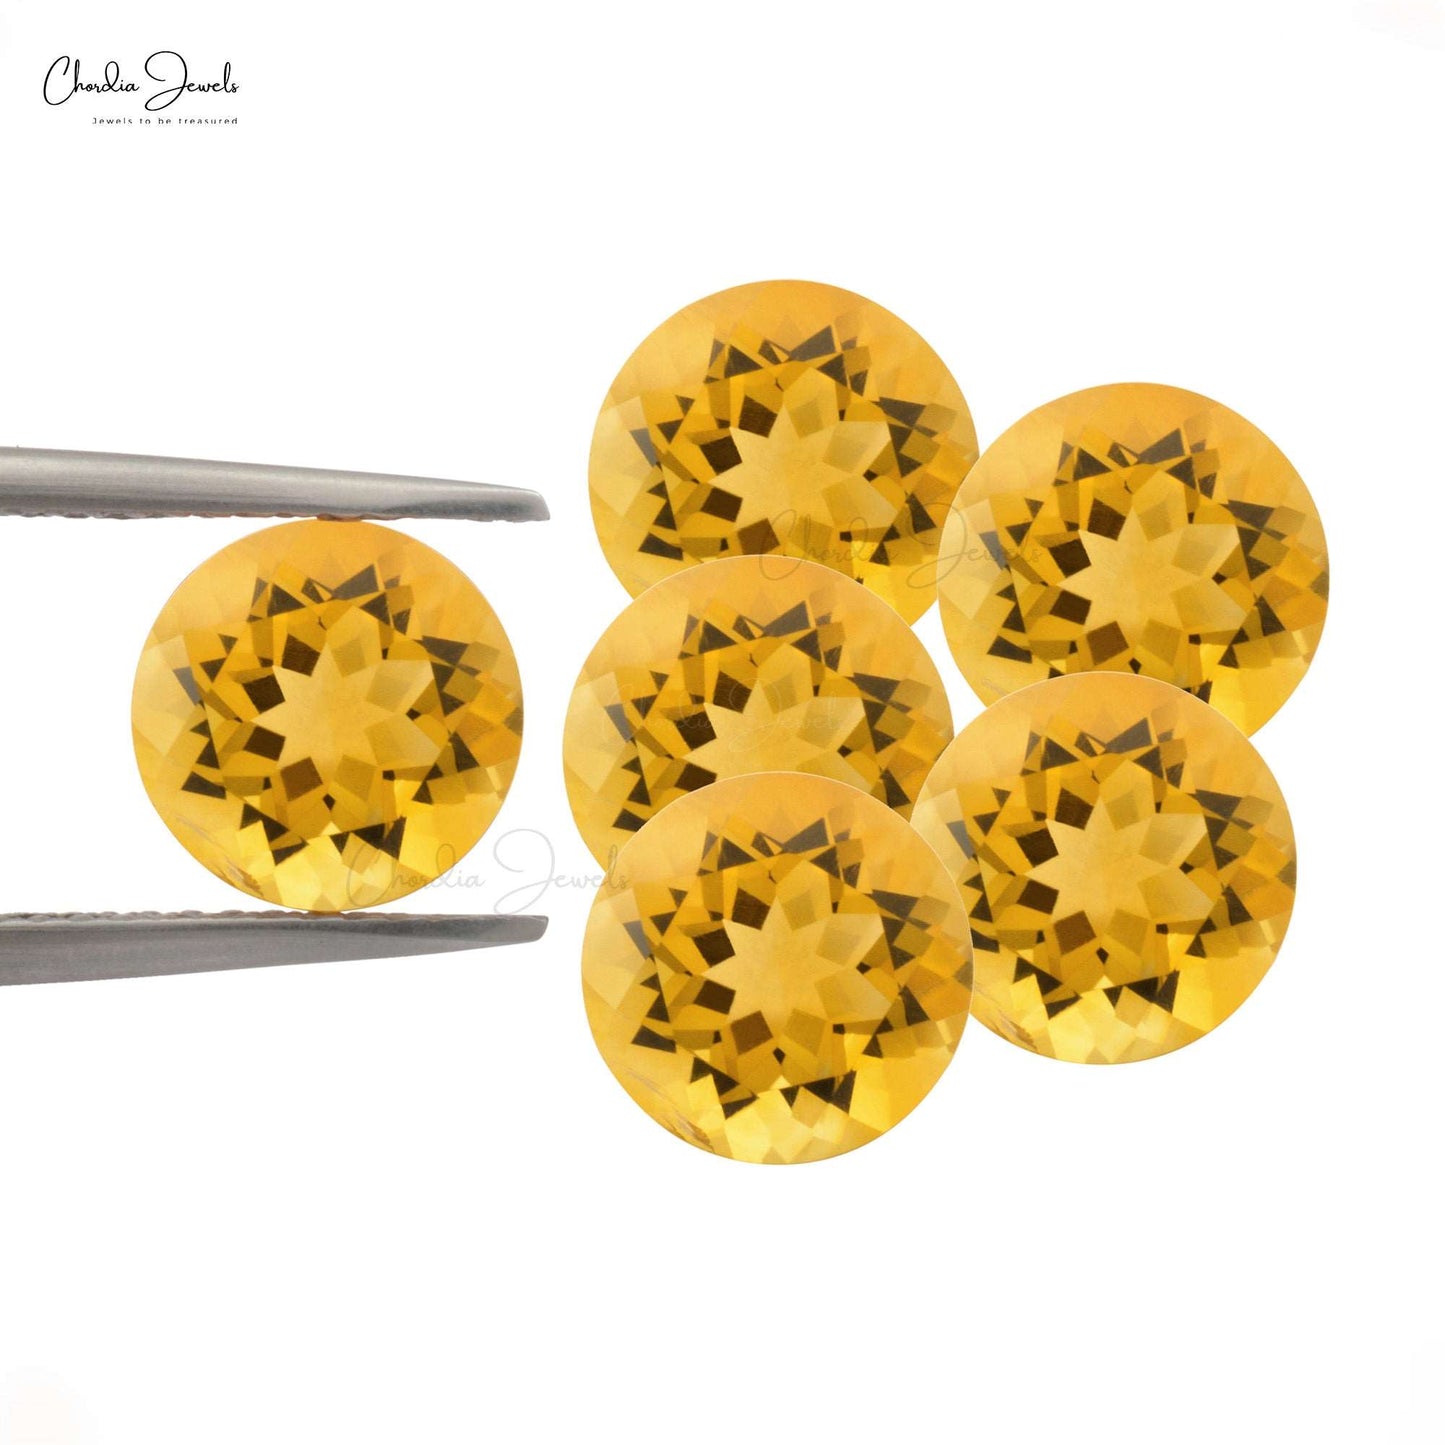 Load image into Gallery viewer, 100% Natural Citrine 6mm Round Semi Precious Gemstone For Making Jewelry, 1 Piece
